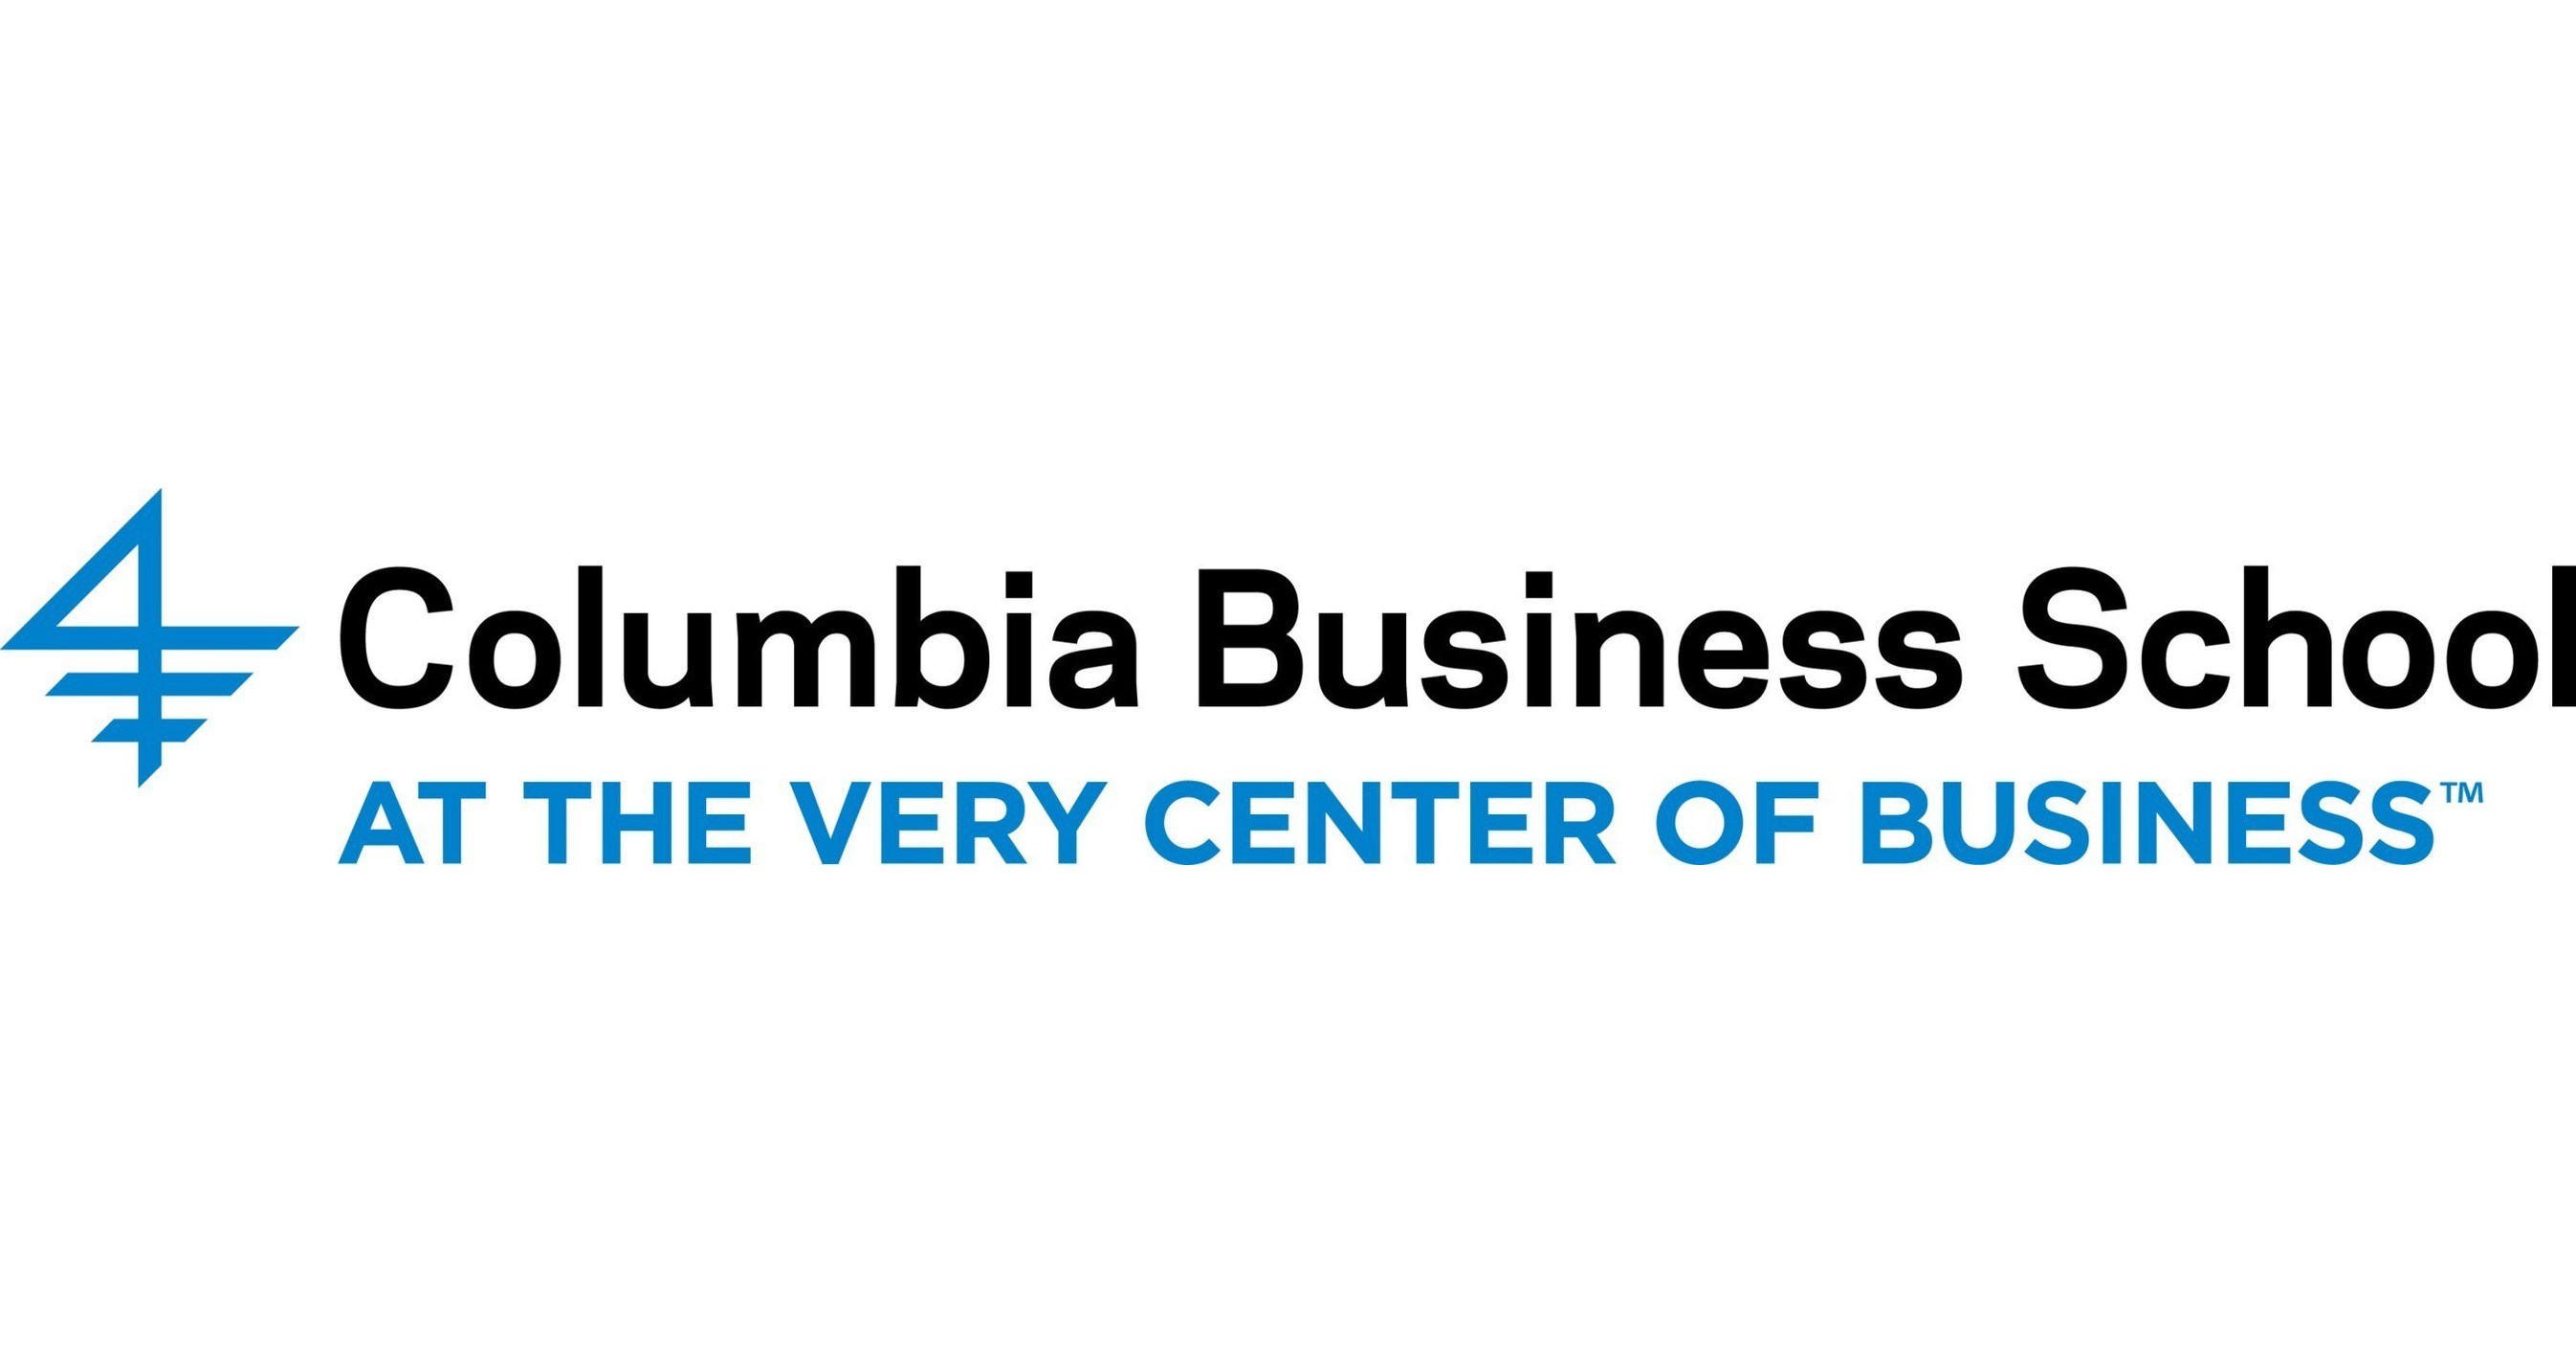 Columbia Business School Convenes Industry Brand Leaders for 10th